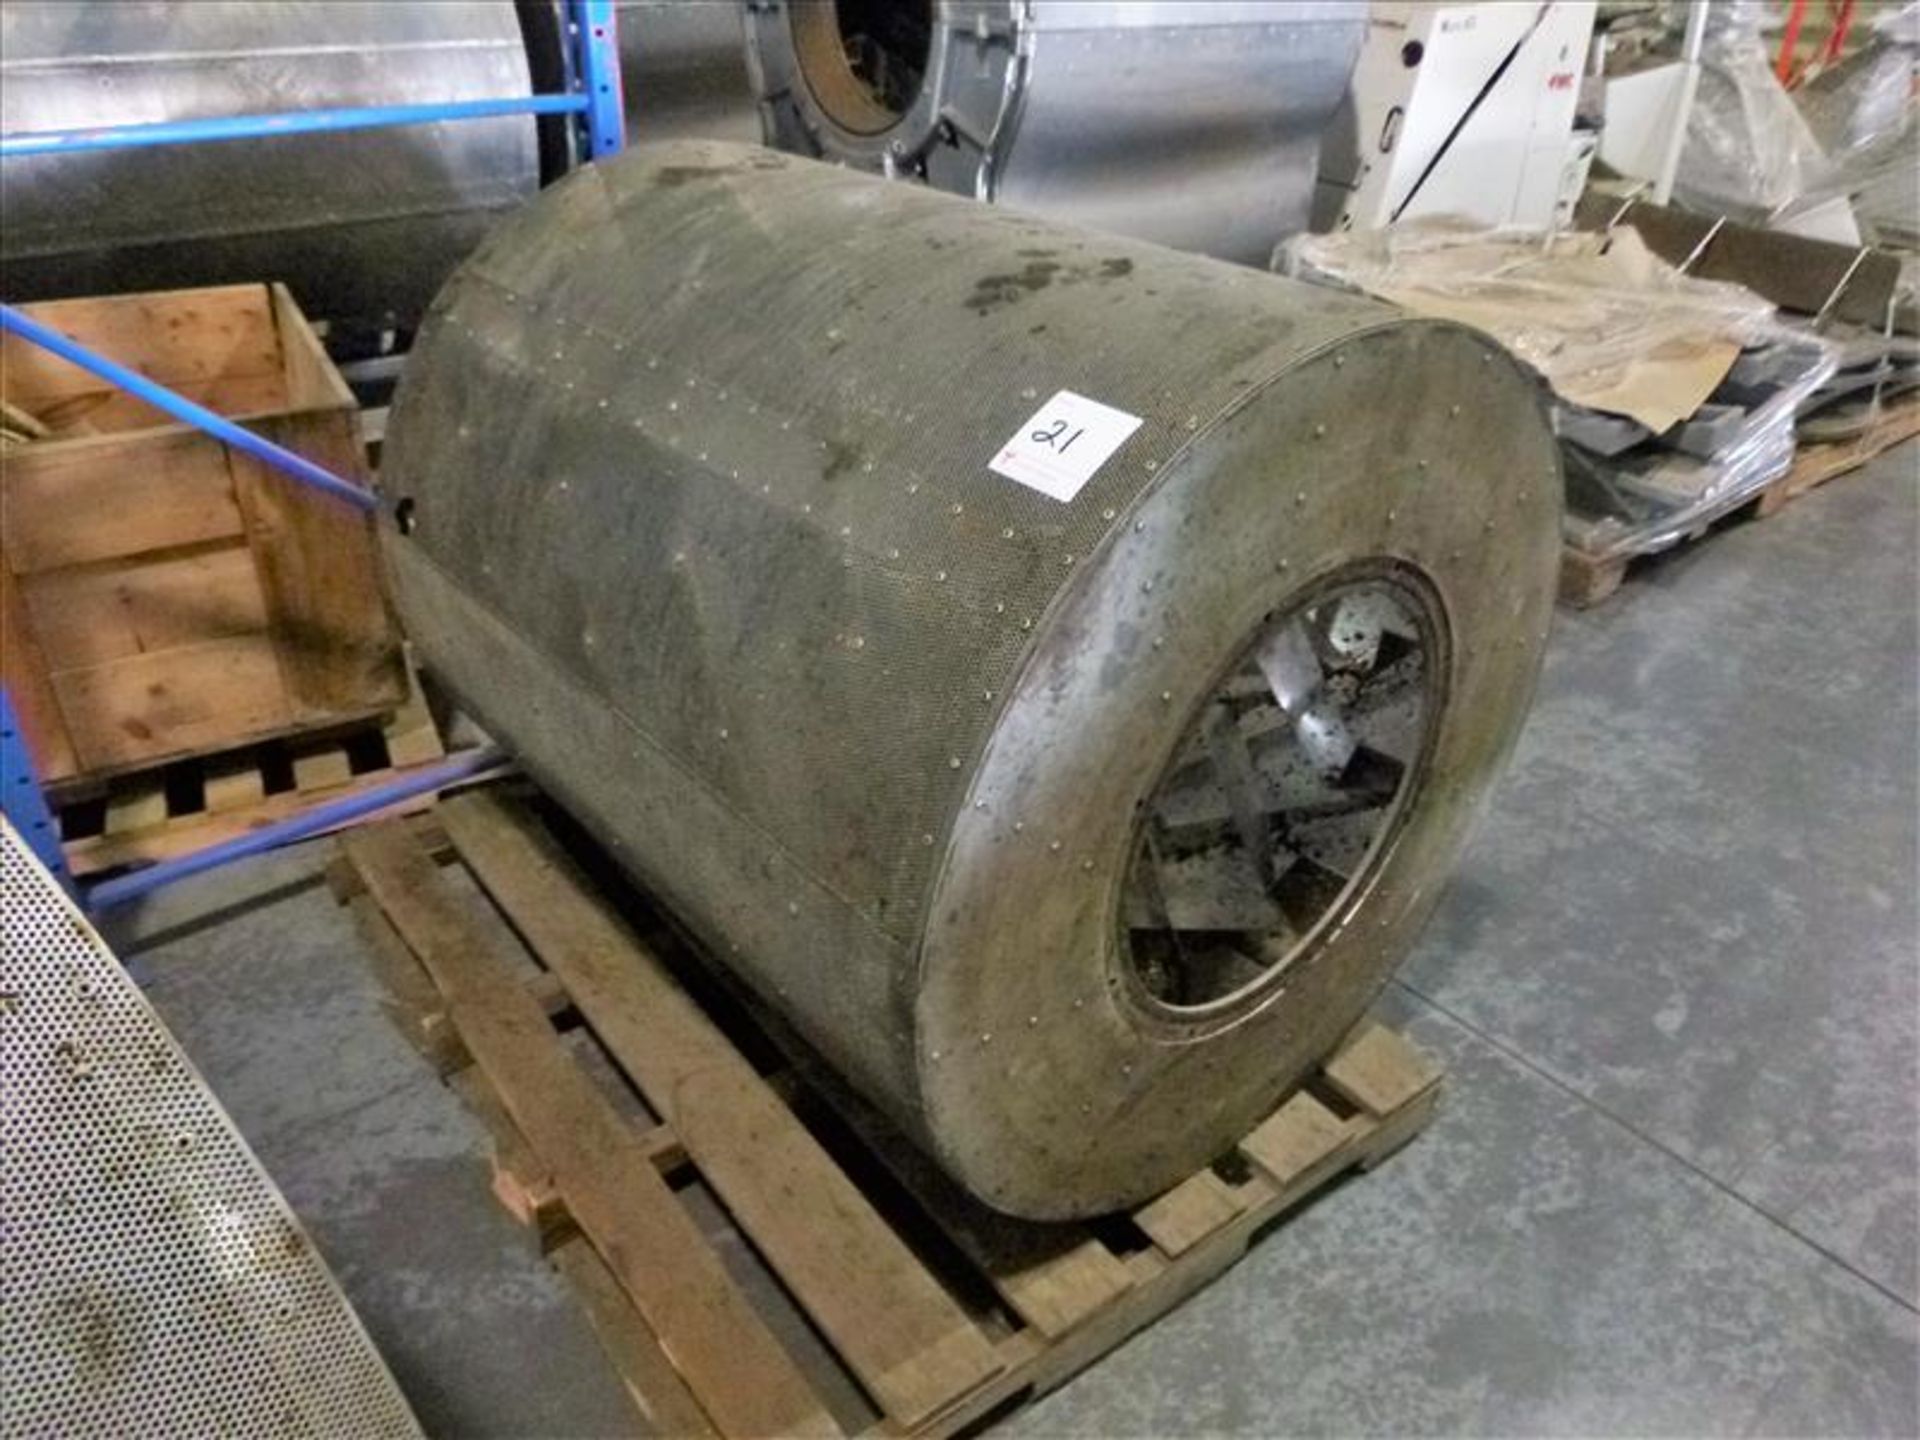 spare cylinder for Burns roaster, mod. Jubilee 14R94 (Subject to Confirmation - details posted under